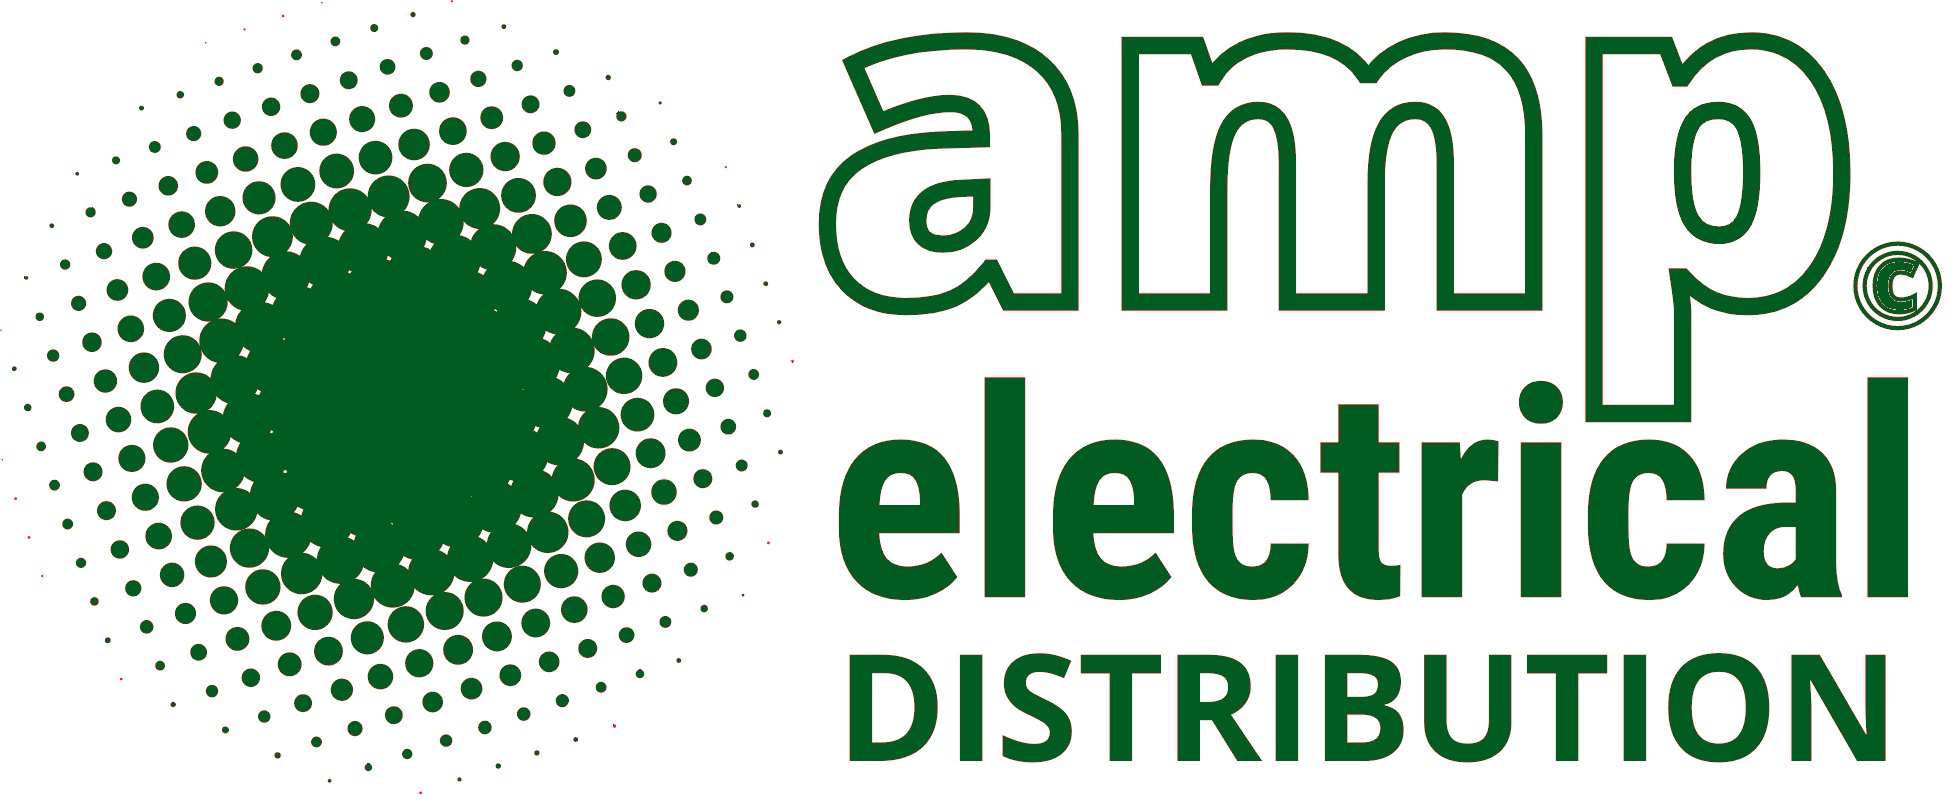 Amp Electrical